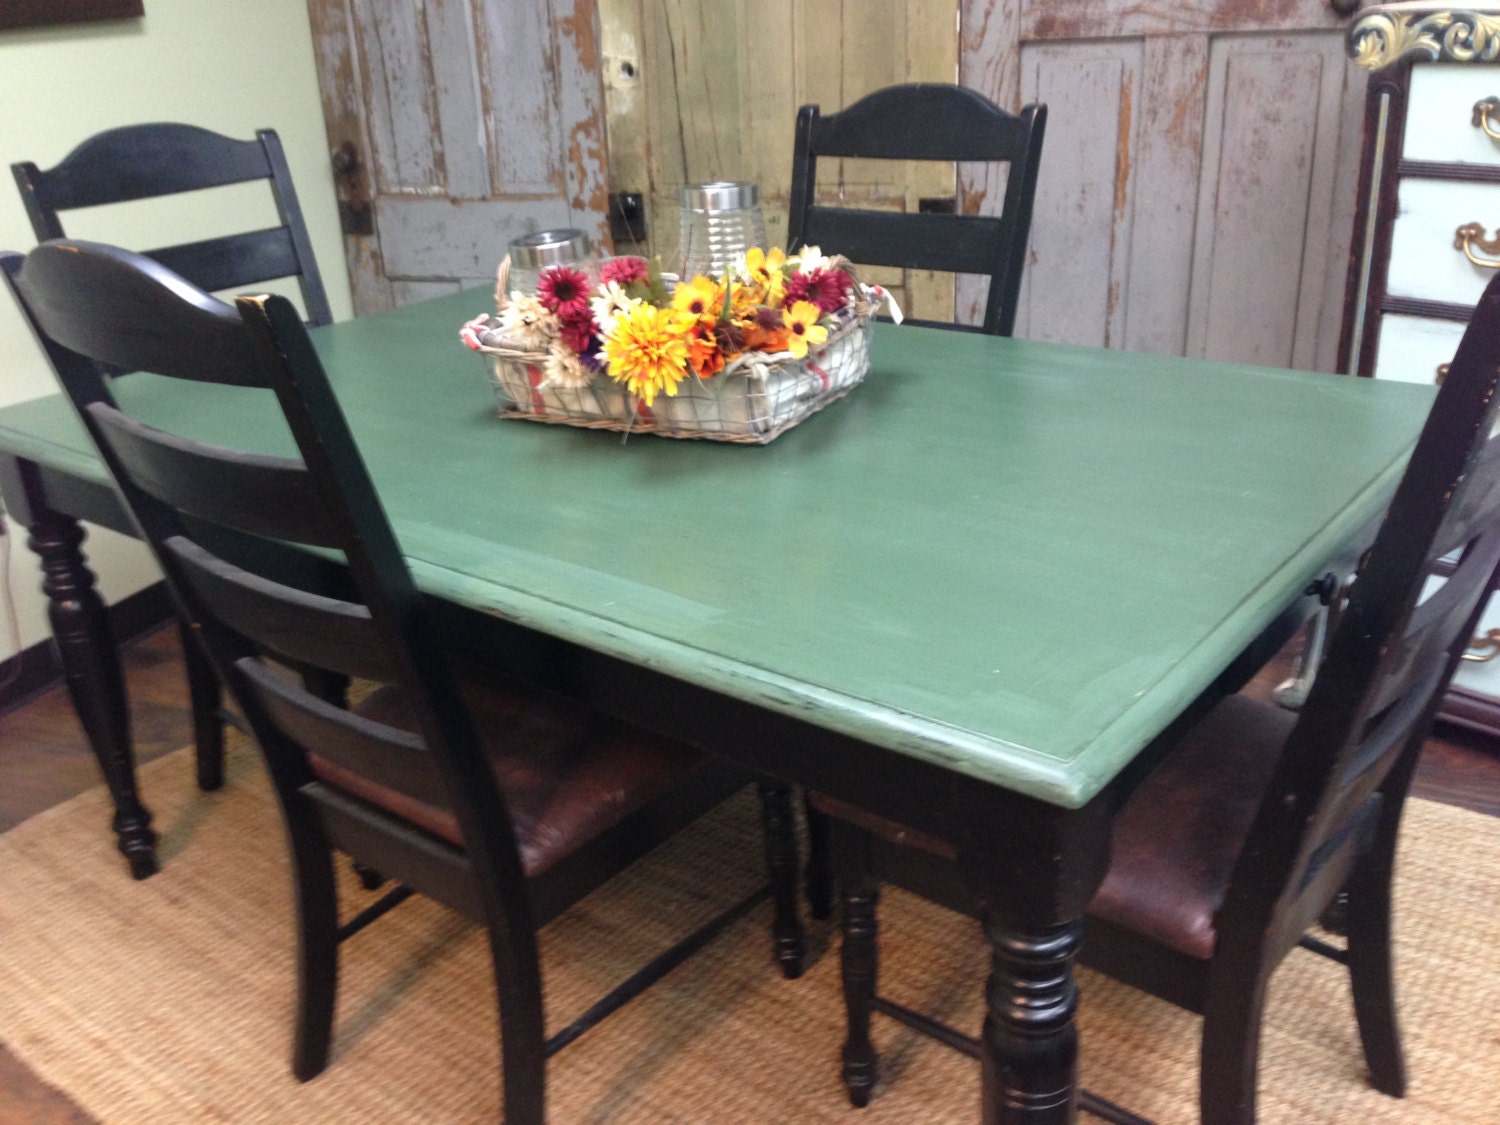 Farm Style Table, Country Kitchen Table Set, Distressed Furniture - VintageHipDecor